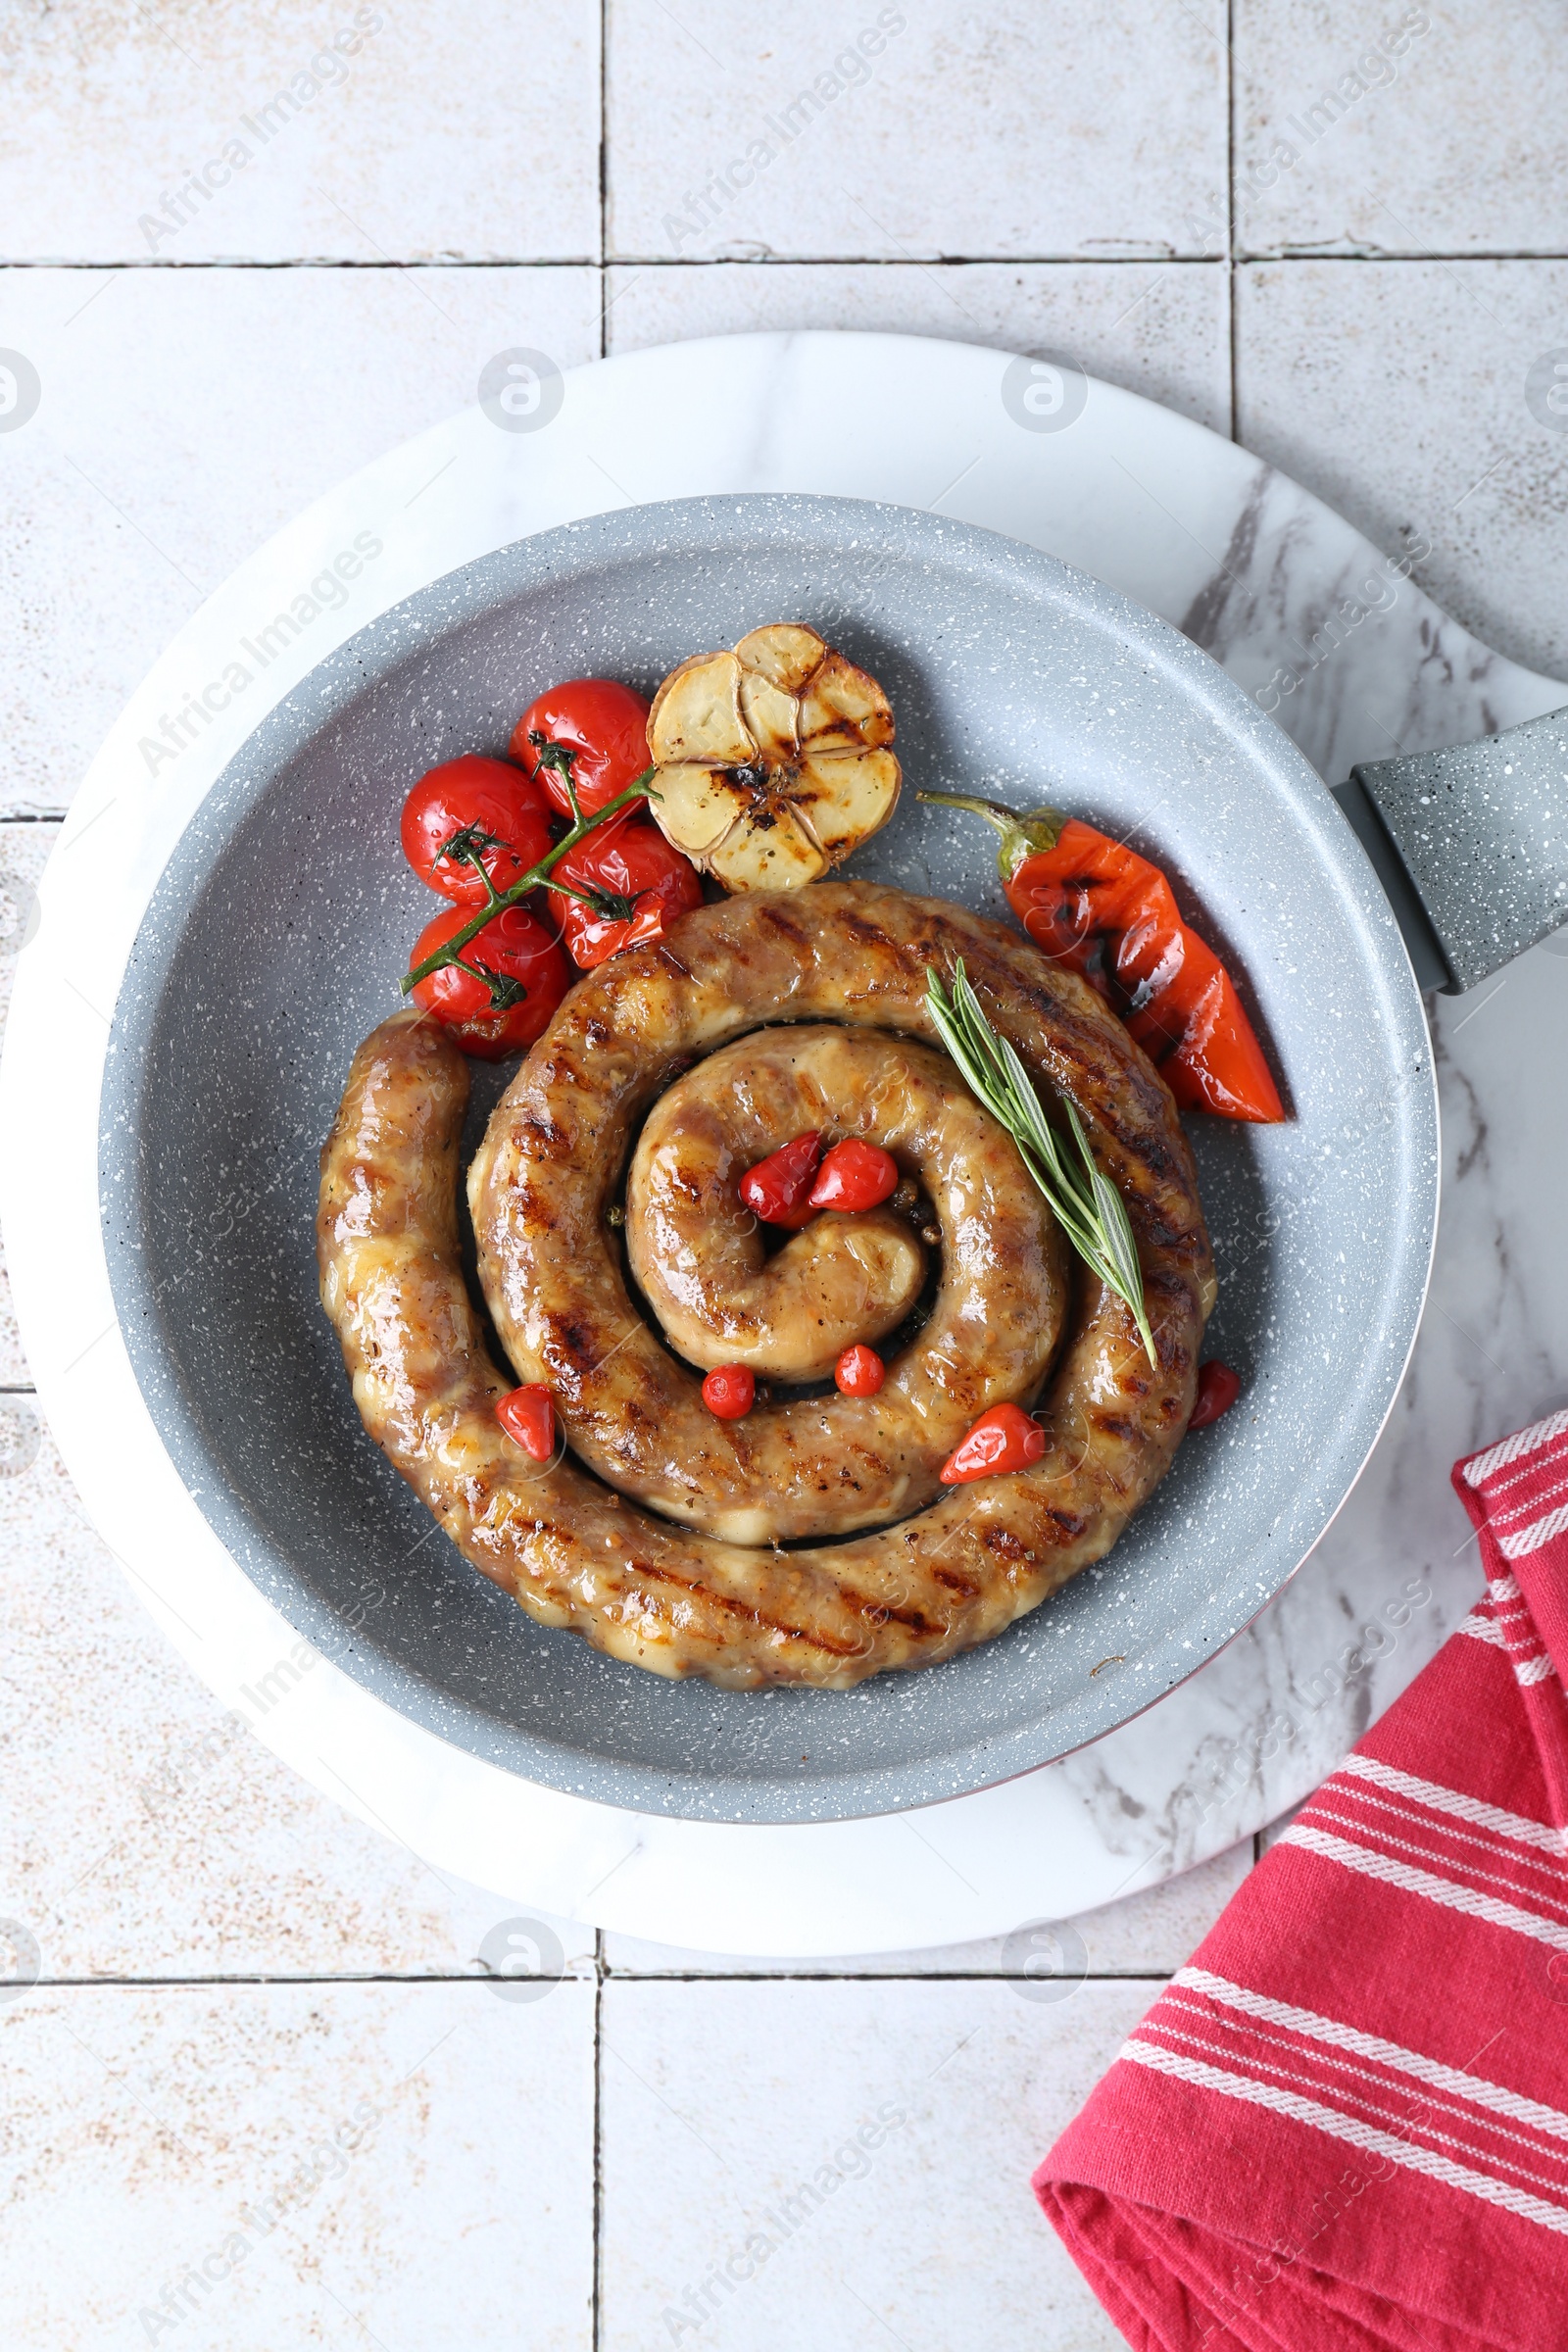 Photo of Delicious homemade sausage with garlic, tomatoes, rosemary and chili in frying pan on light tiled table, top view